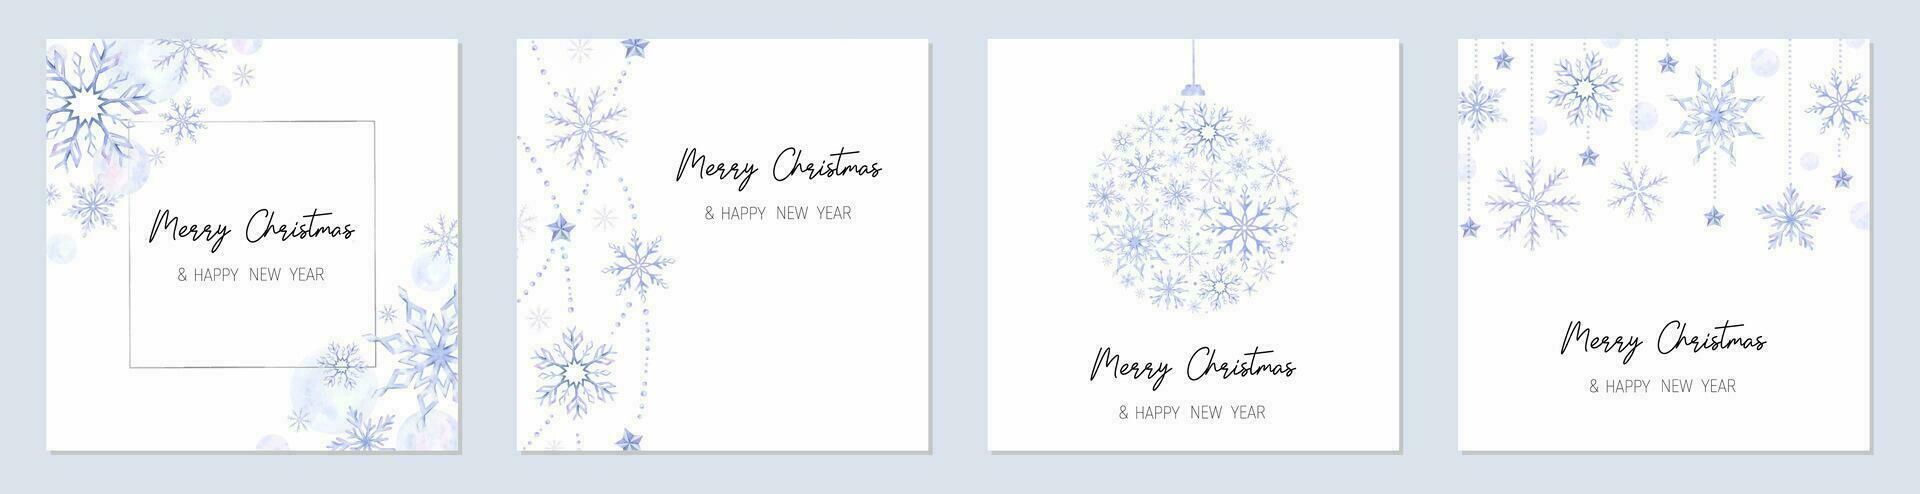 Set of Christmas card, invitation with Snowflakes . Holiday postcards. Preparation for the celebration of Christmas and New Year. Holiday Party Card Templates Design. Watercolor illustrations. vector